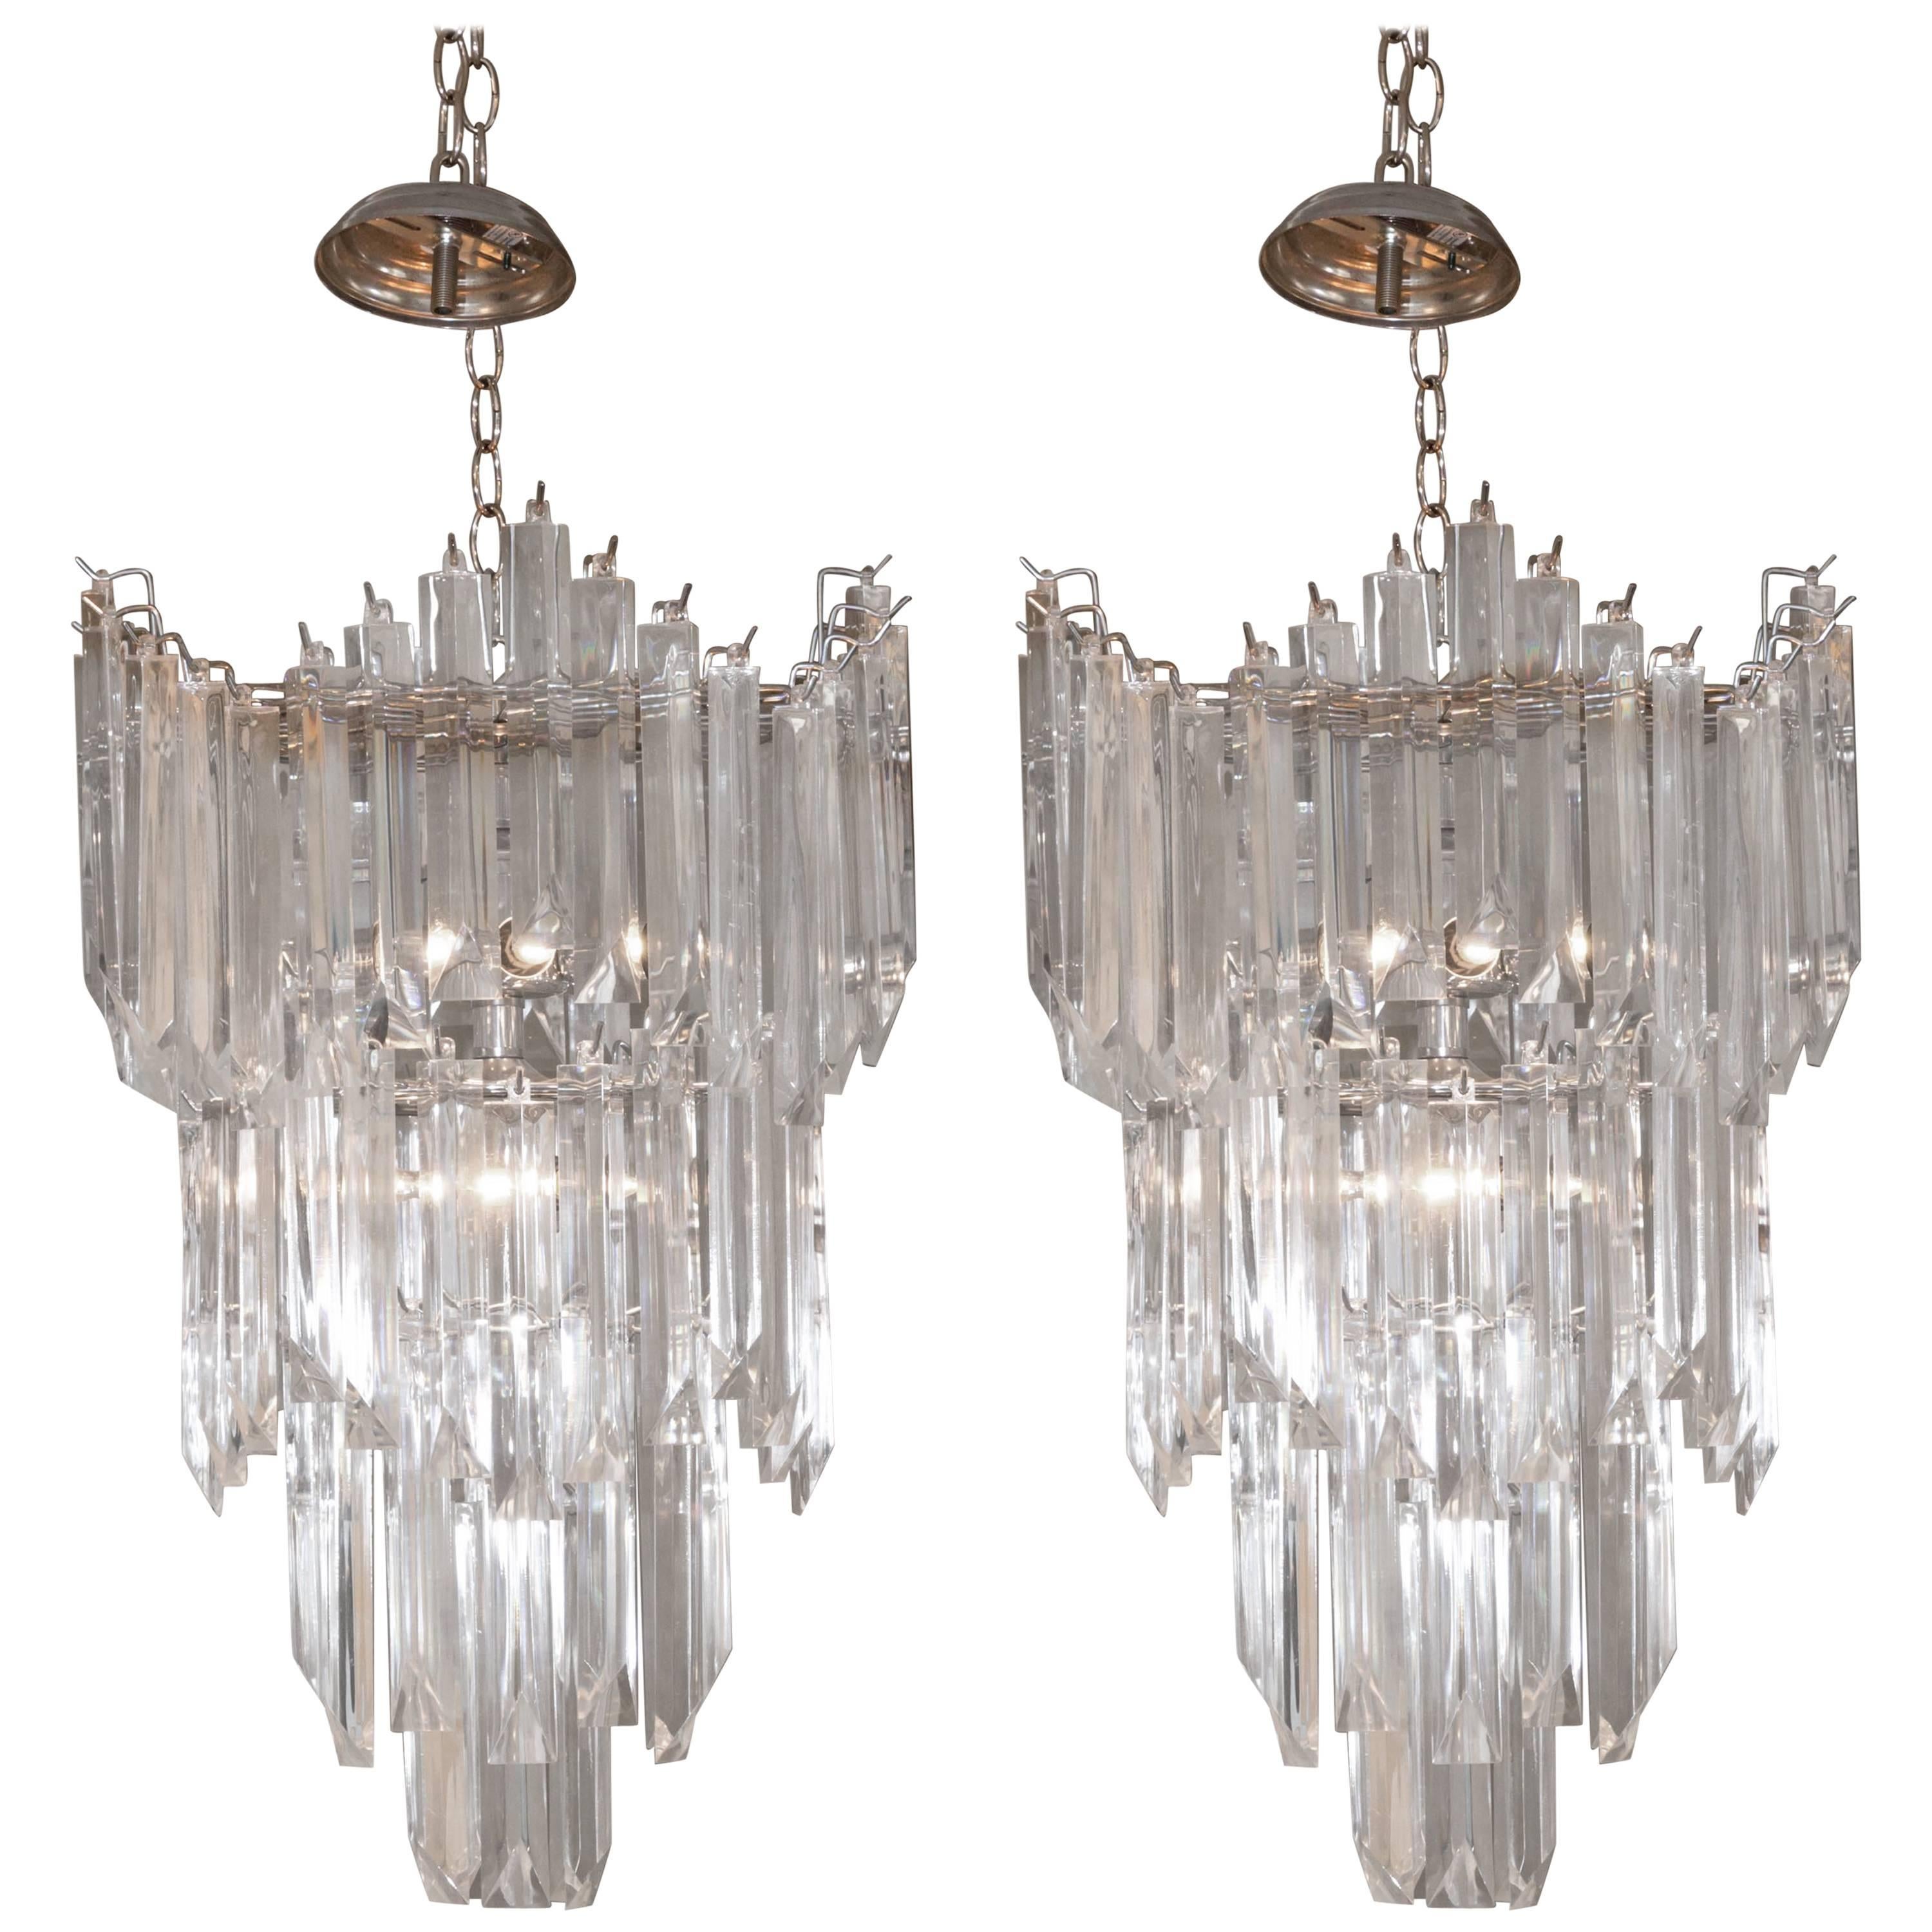 Rare and Attractive Pair of Mid-Century Lucite Chandeliers For Sale